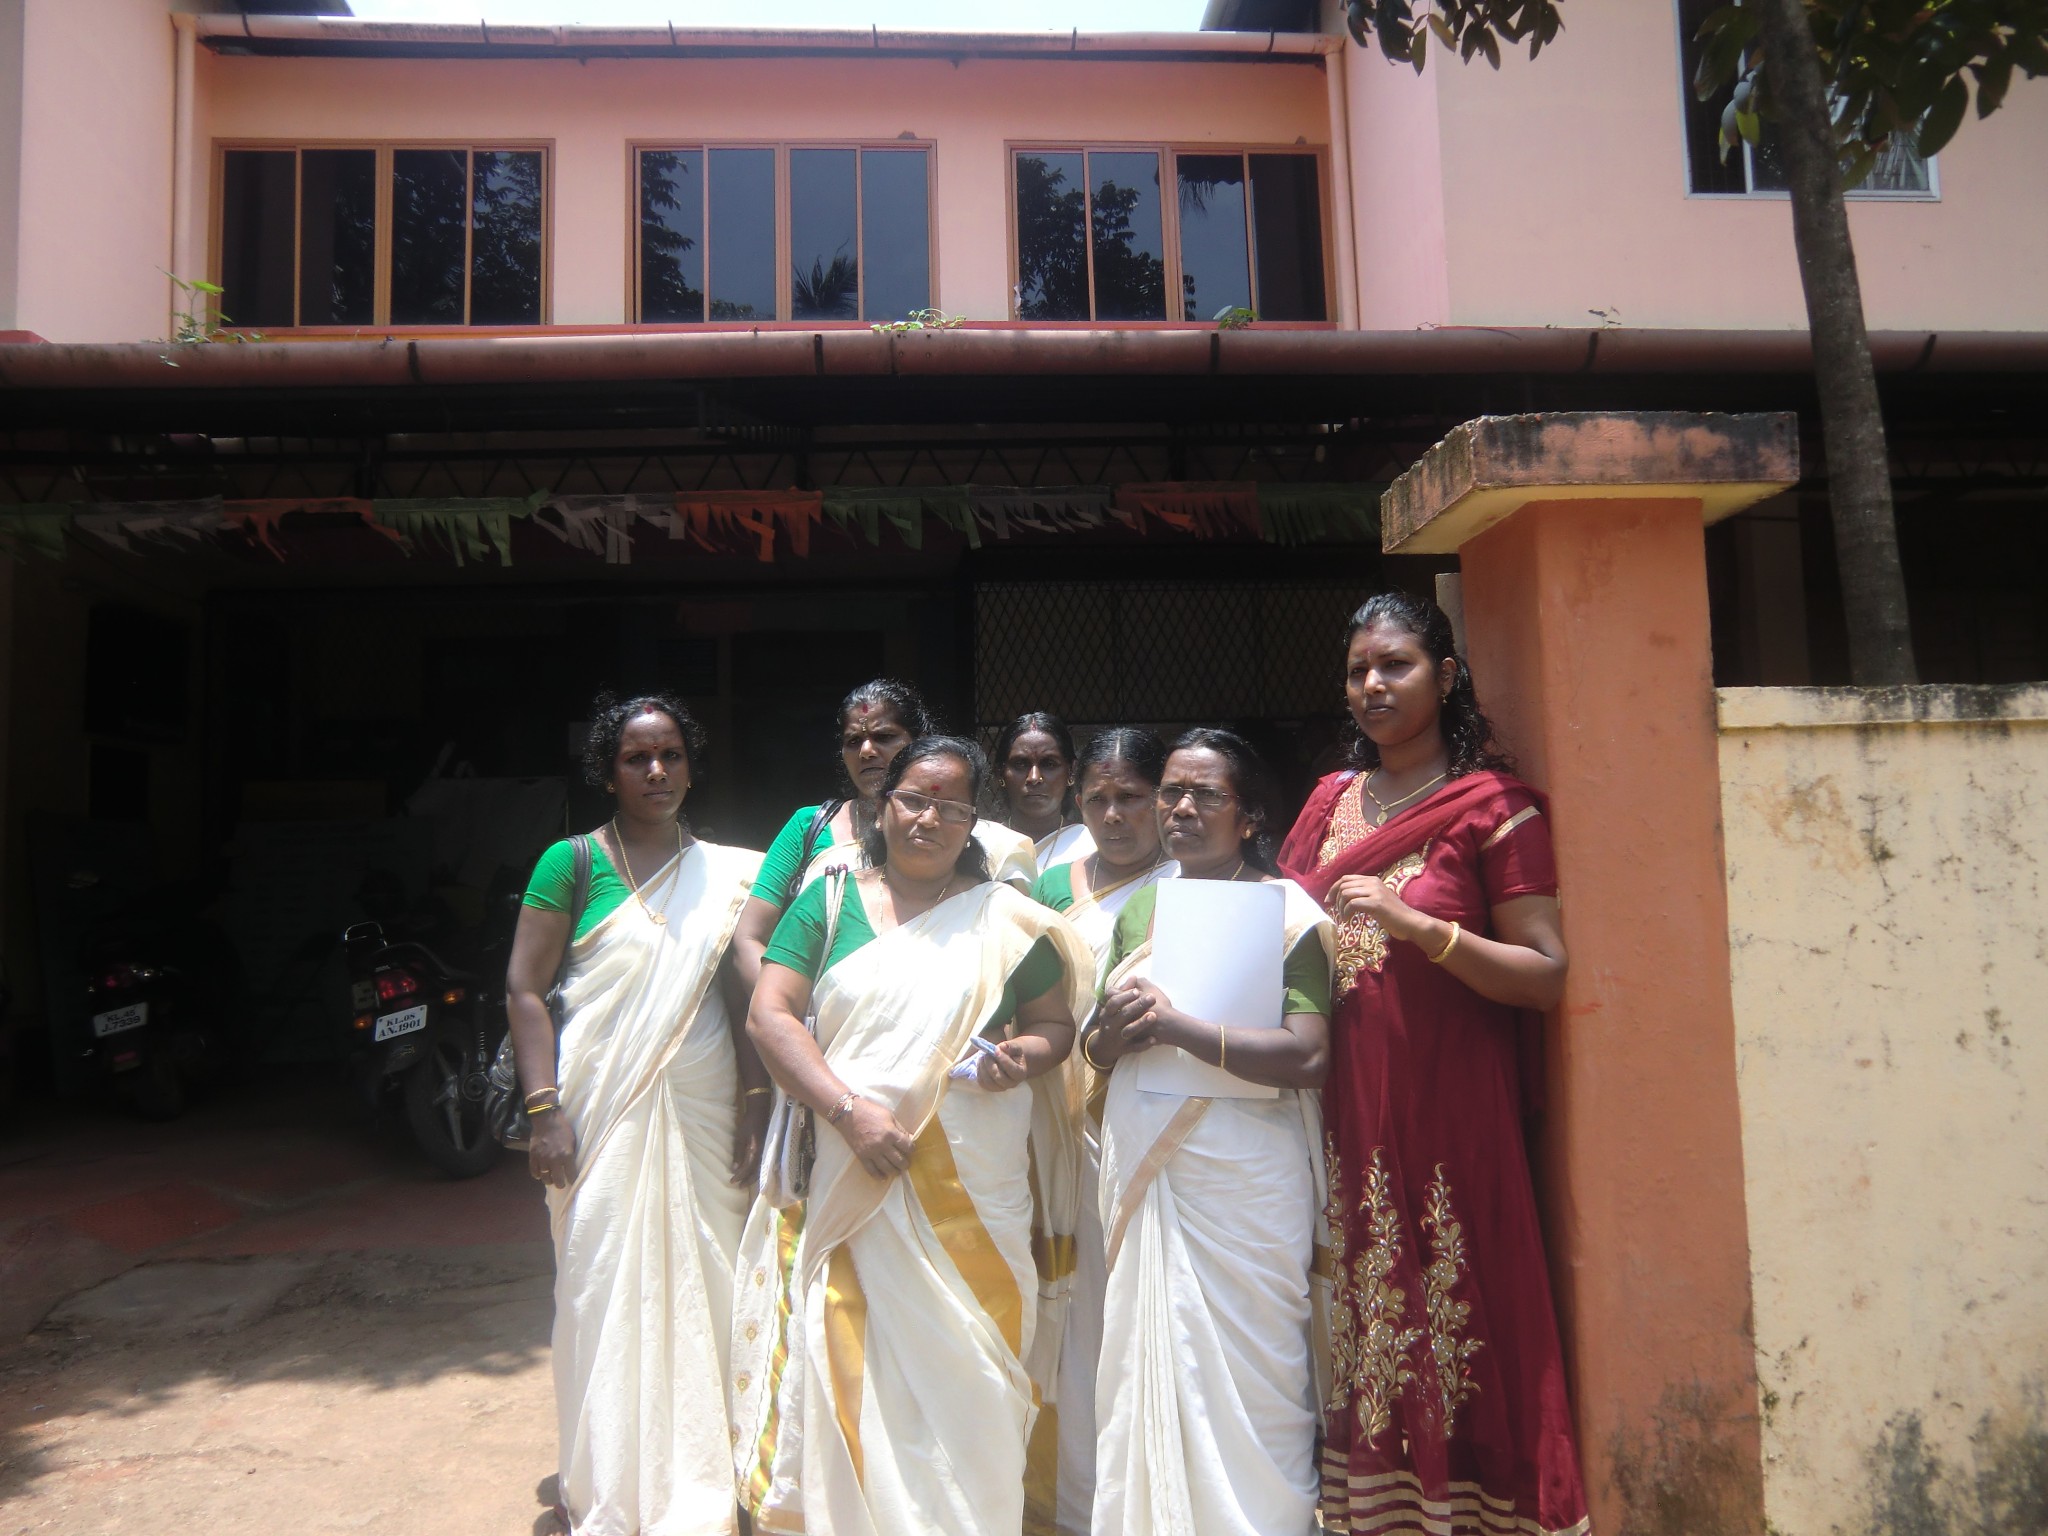 The feisty women members of grassroots groups like the Kerala Pulayar Maha Sabha (KPMS) or the OBC Ezahva organisation and the Sree Narayana Dharma Paripalana (SNDP) in Kerala are successfully setting the community development agenda for their local self government bodies. (Credit: Ajitha Menon\WFS)